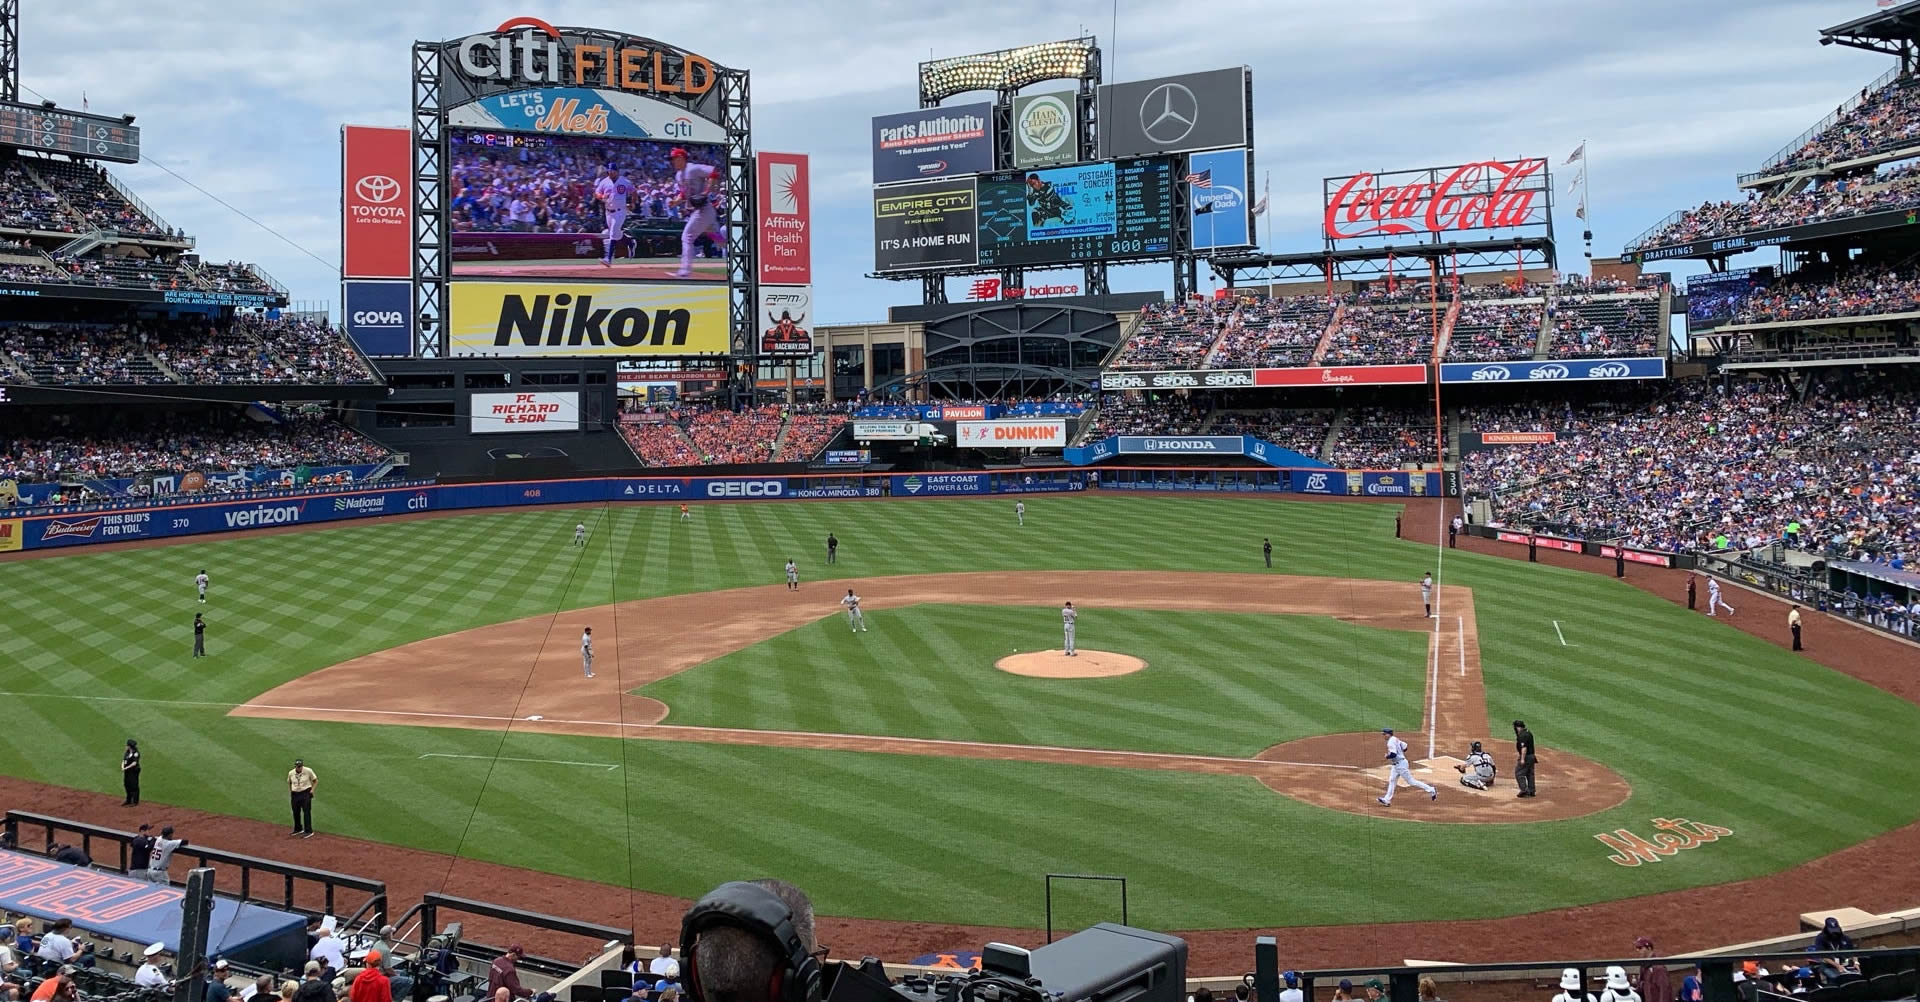 section 119 seat view  - citi field